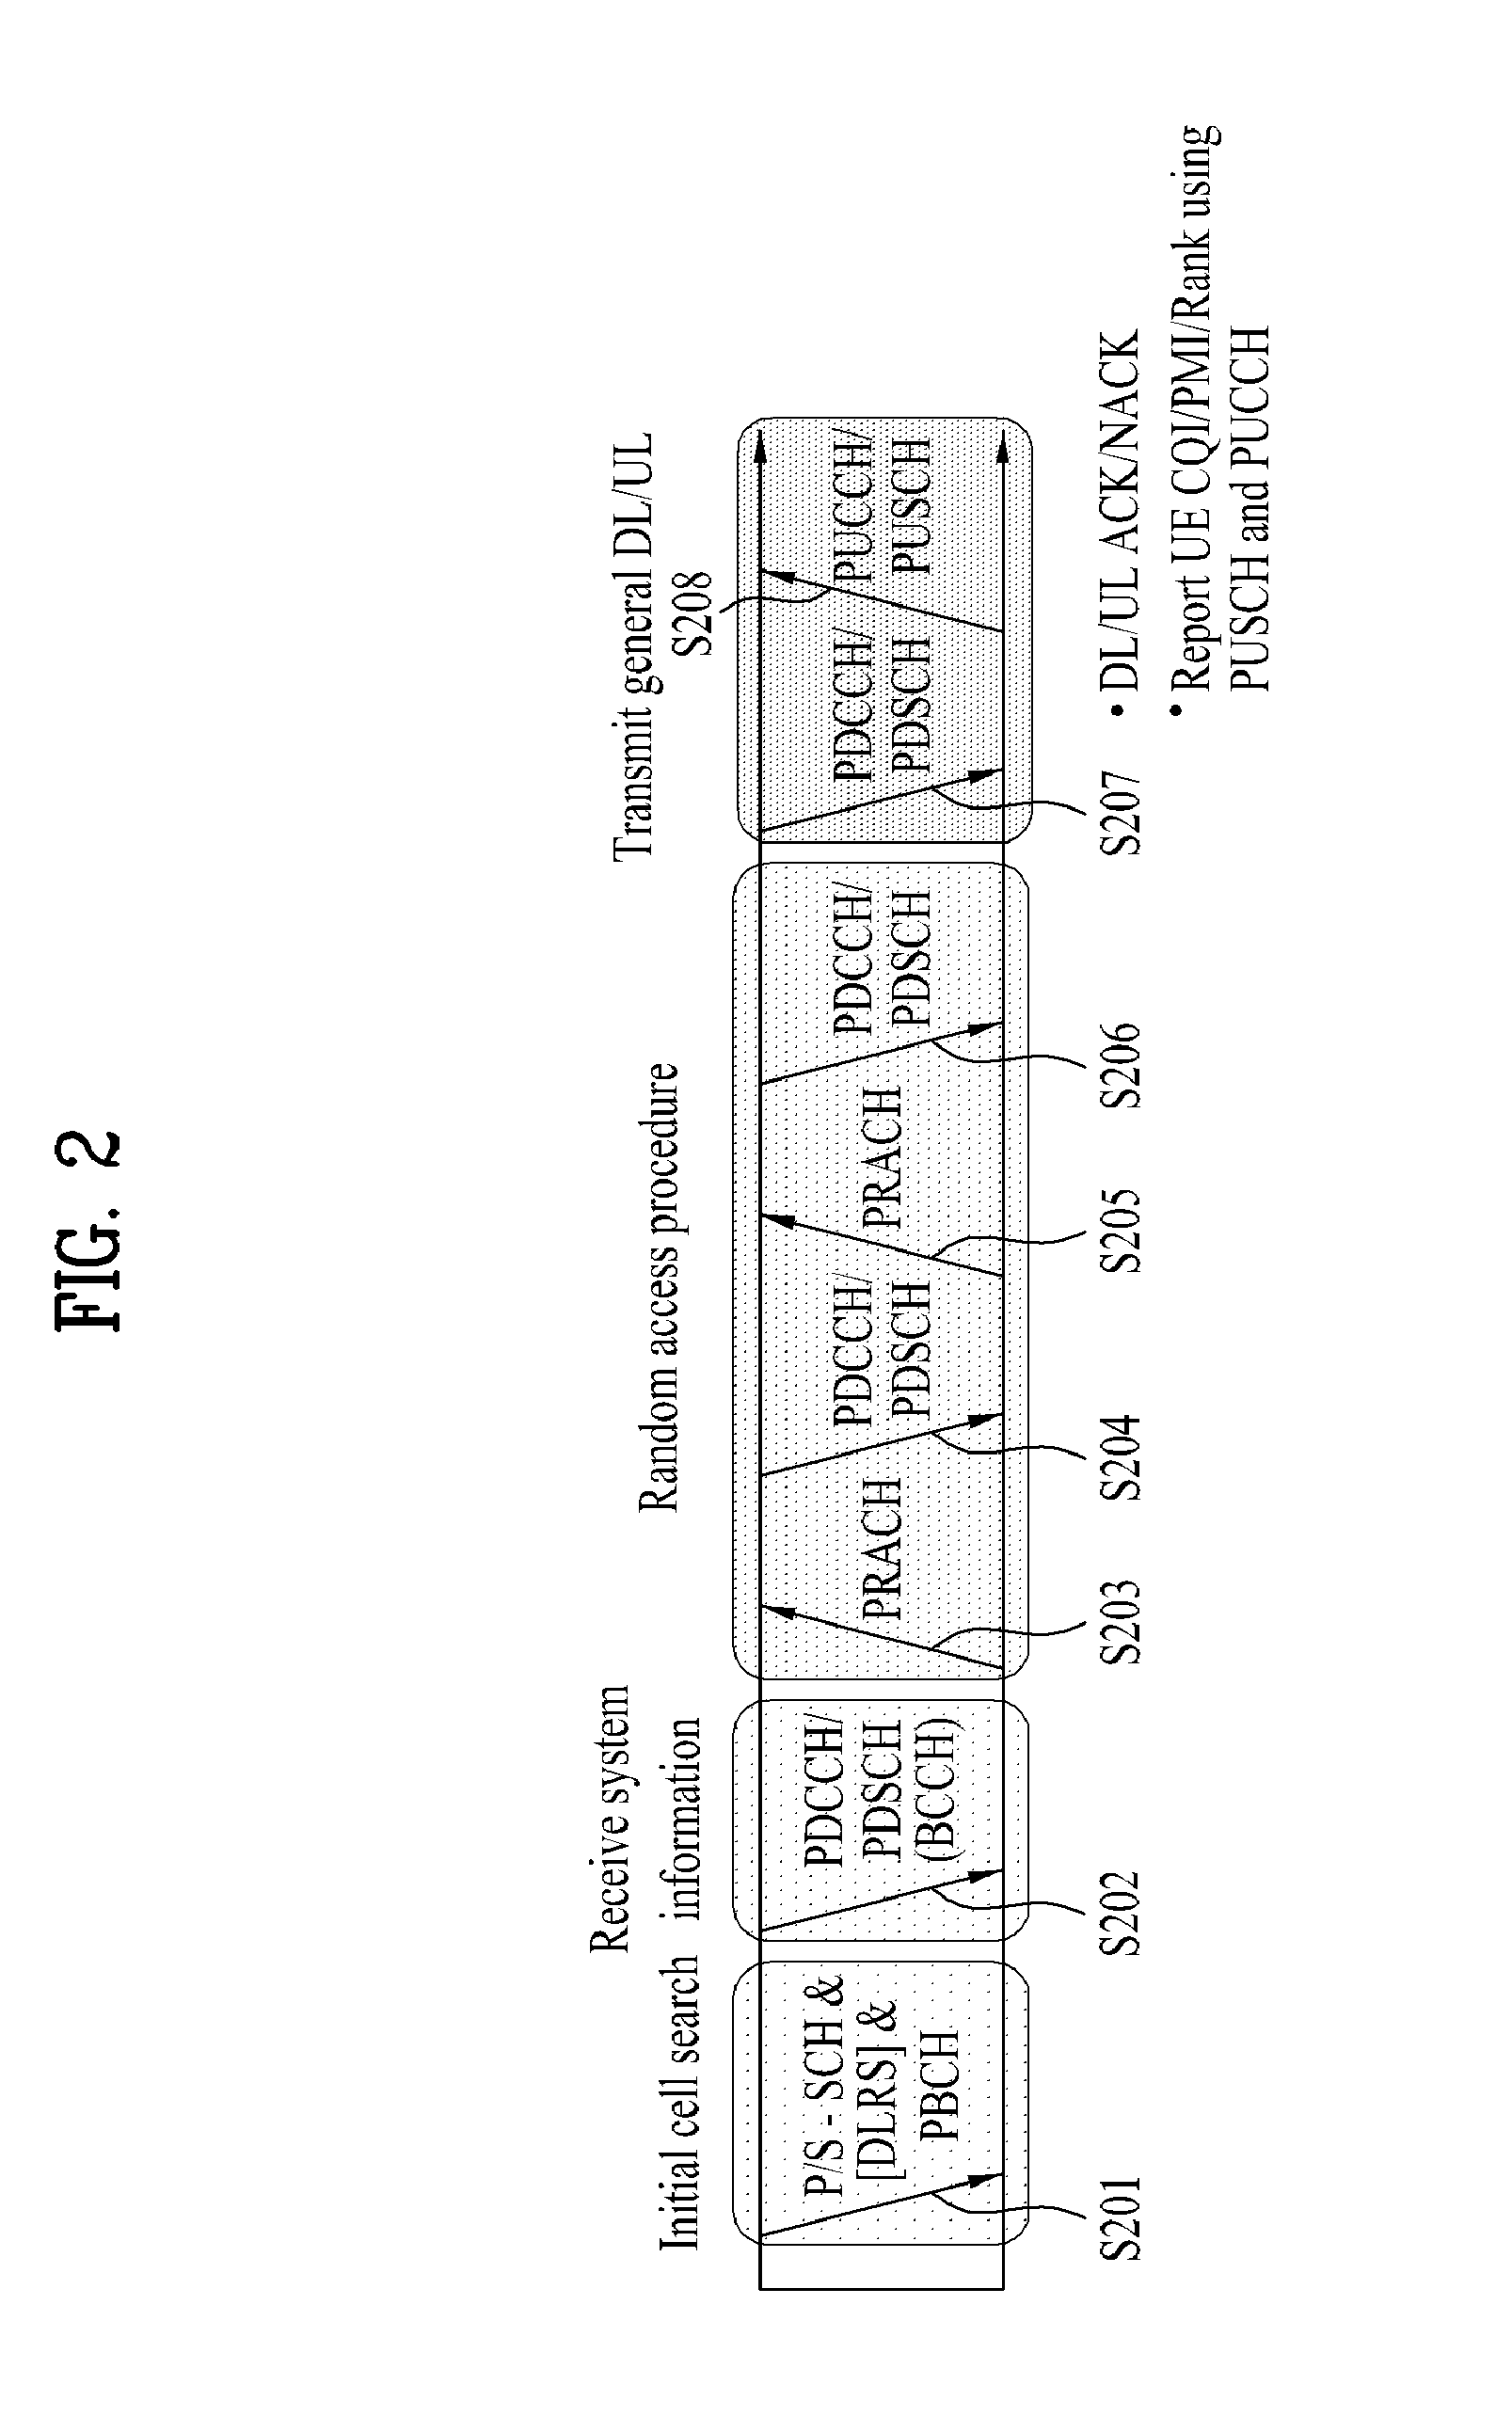 Method and apparatus for removing inter-heterogeneous cell interference